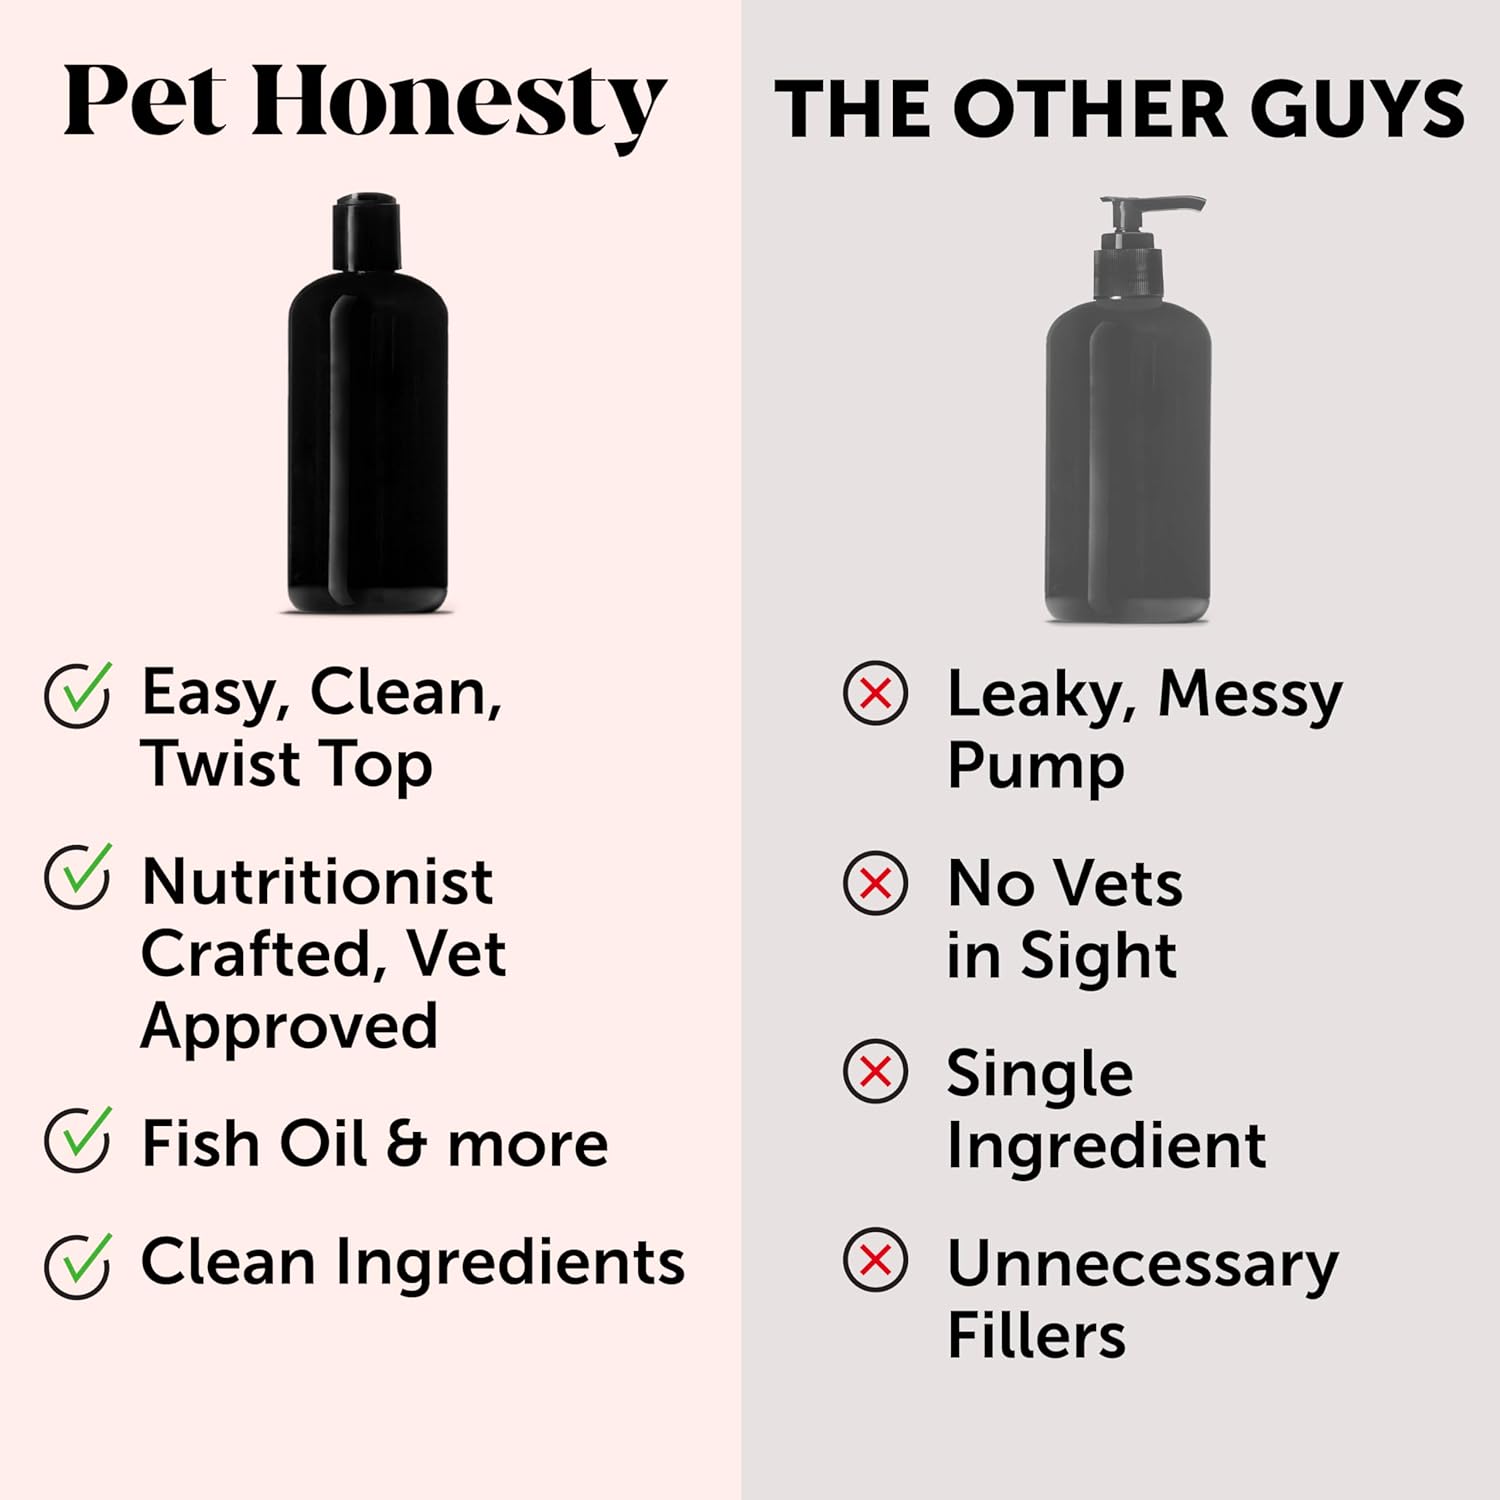 Pet Honesty Wild Alaskan Salmon Oil, Omega-3 Fish Oil for Dogs and Cats, Fatty Acids, Salmon Oil for Dogs, Skin and Coat Health, Pure Dog Food Topper, Supports Joints, Brain & Heart Health - 32oz : Pet Supplies